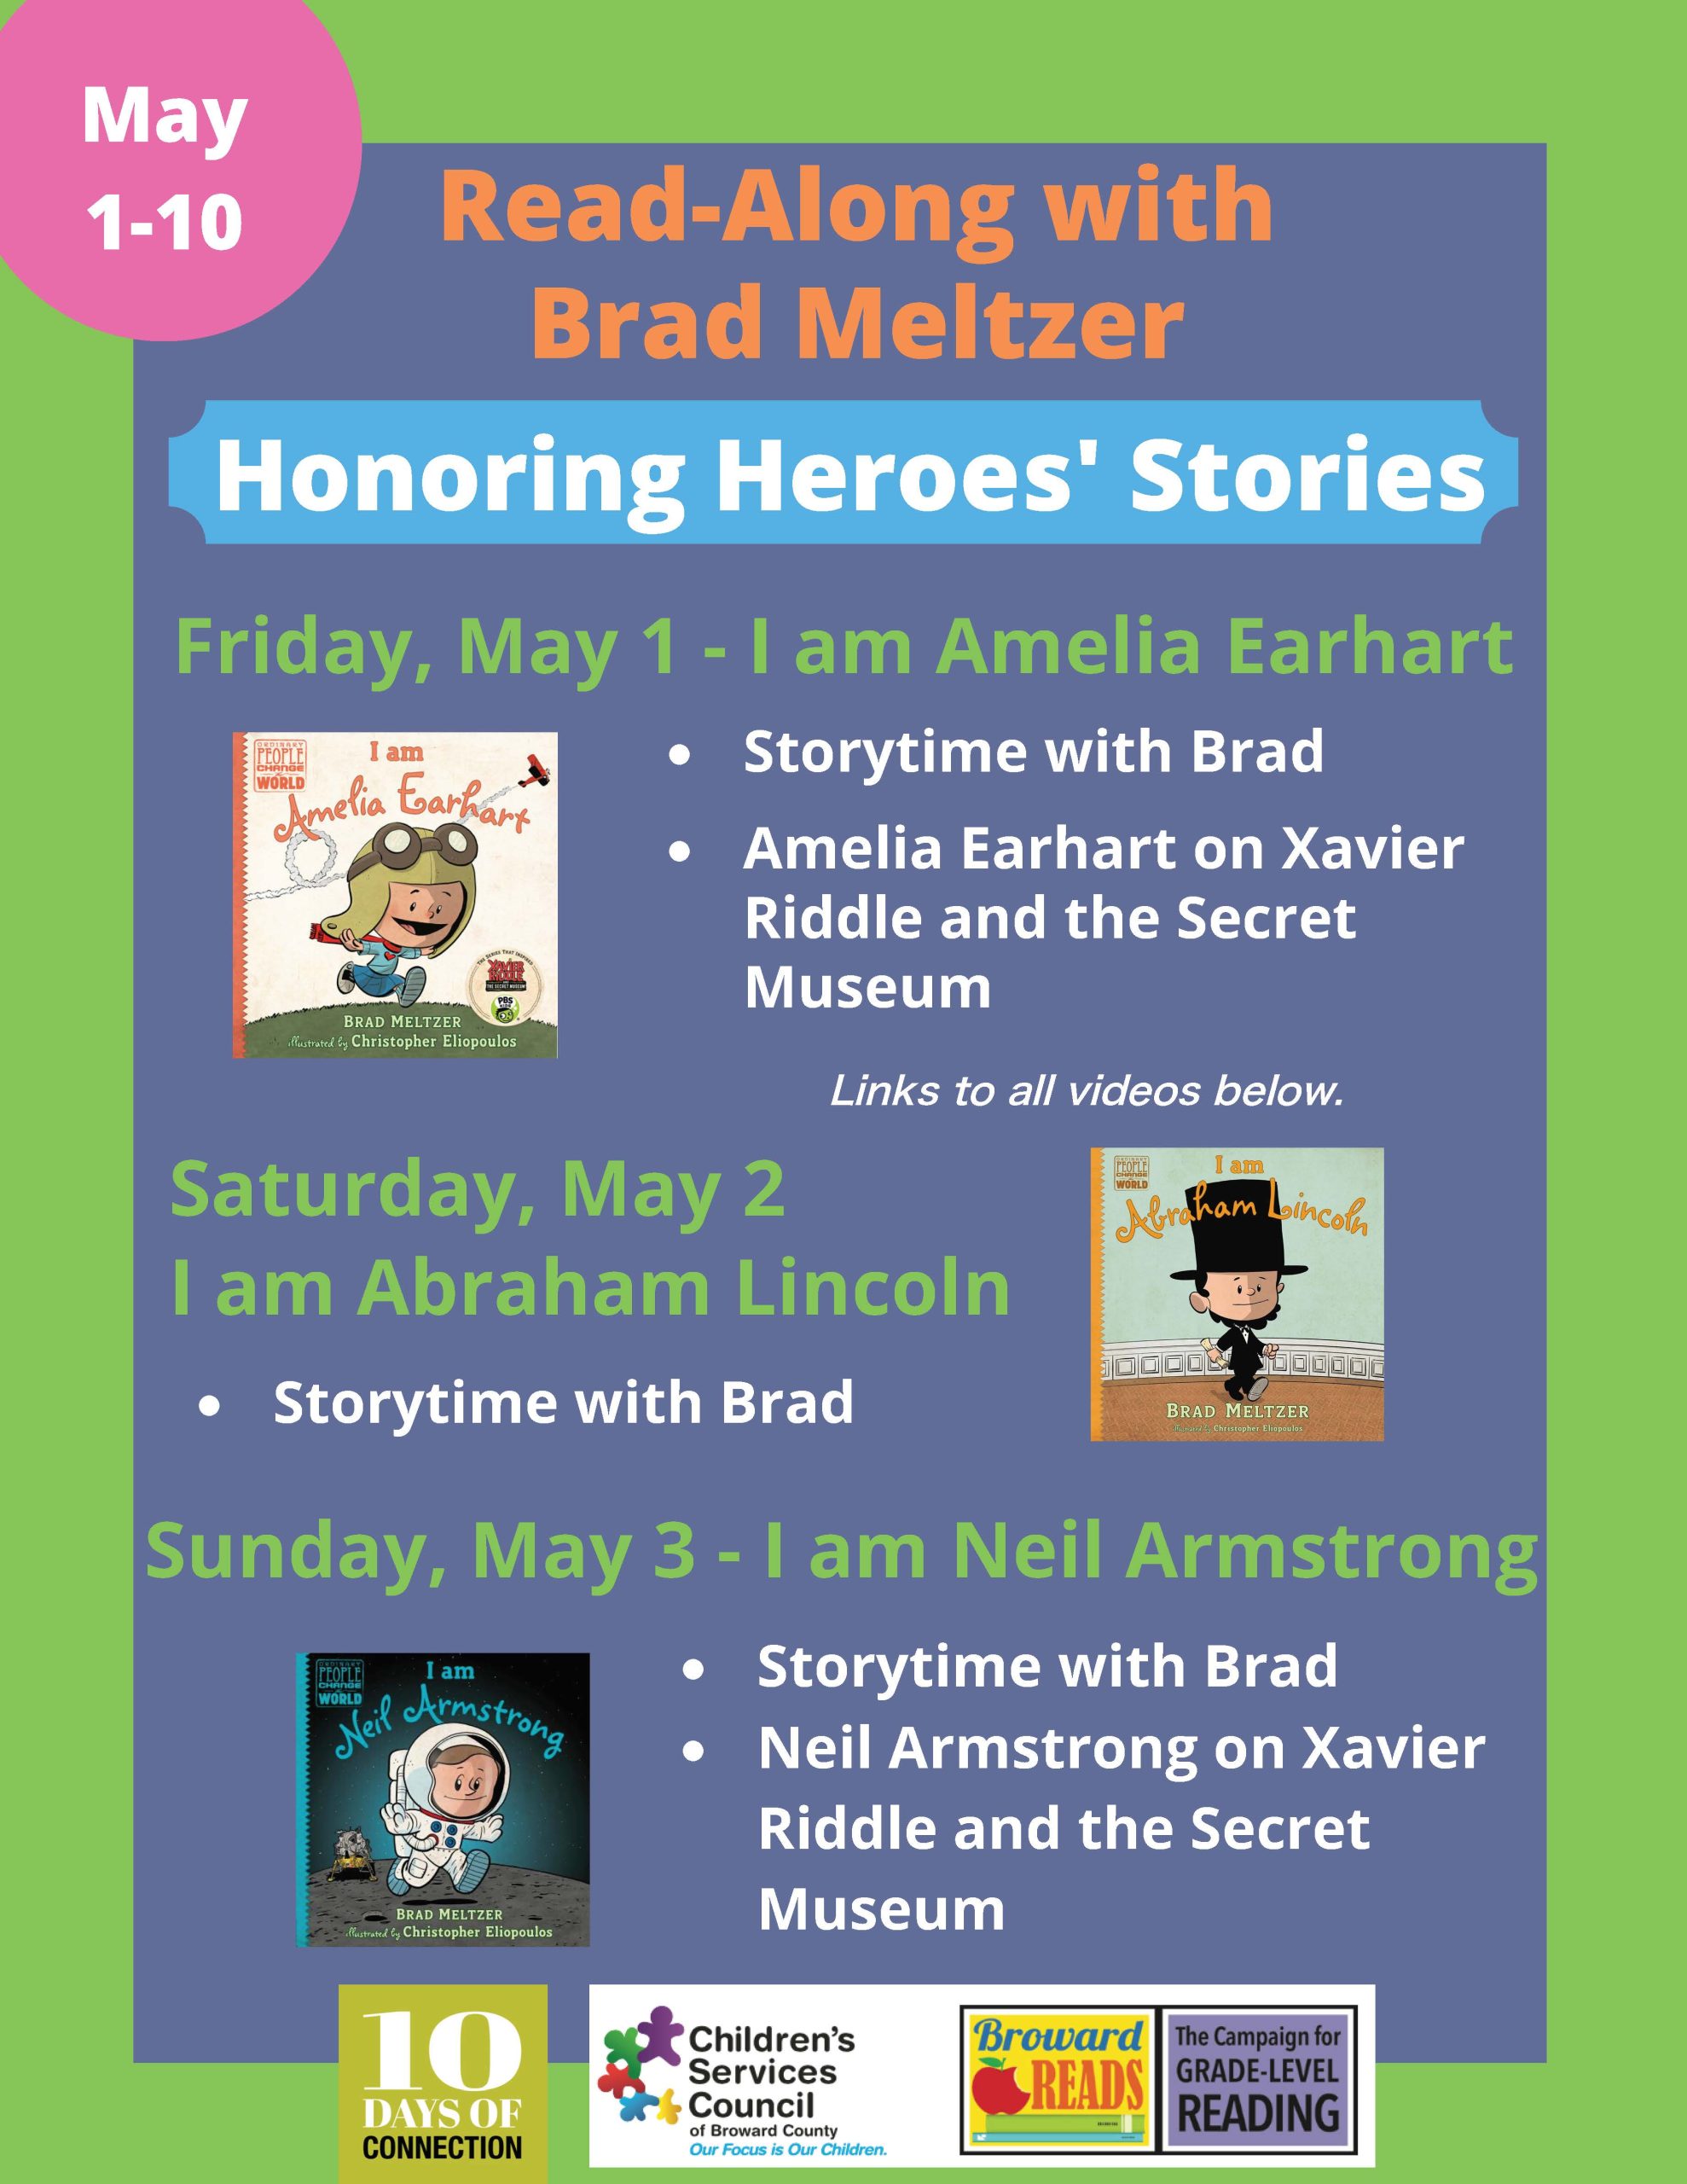 read along with brad meltzer image one